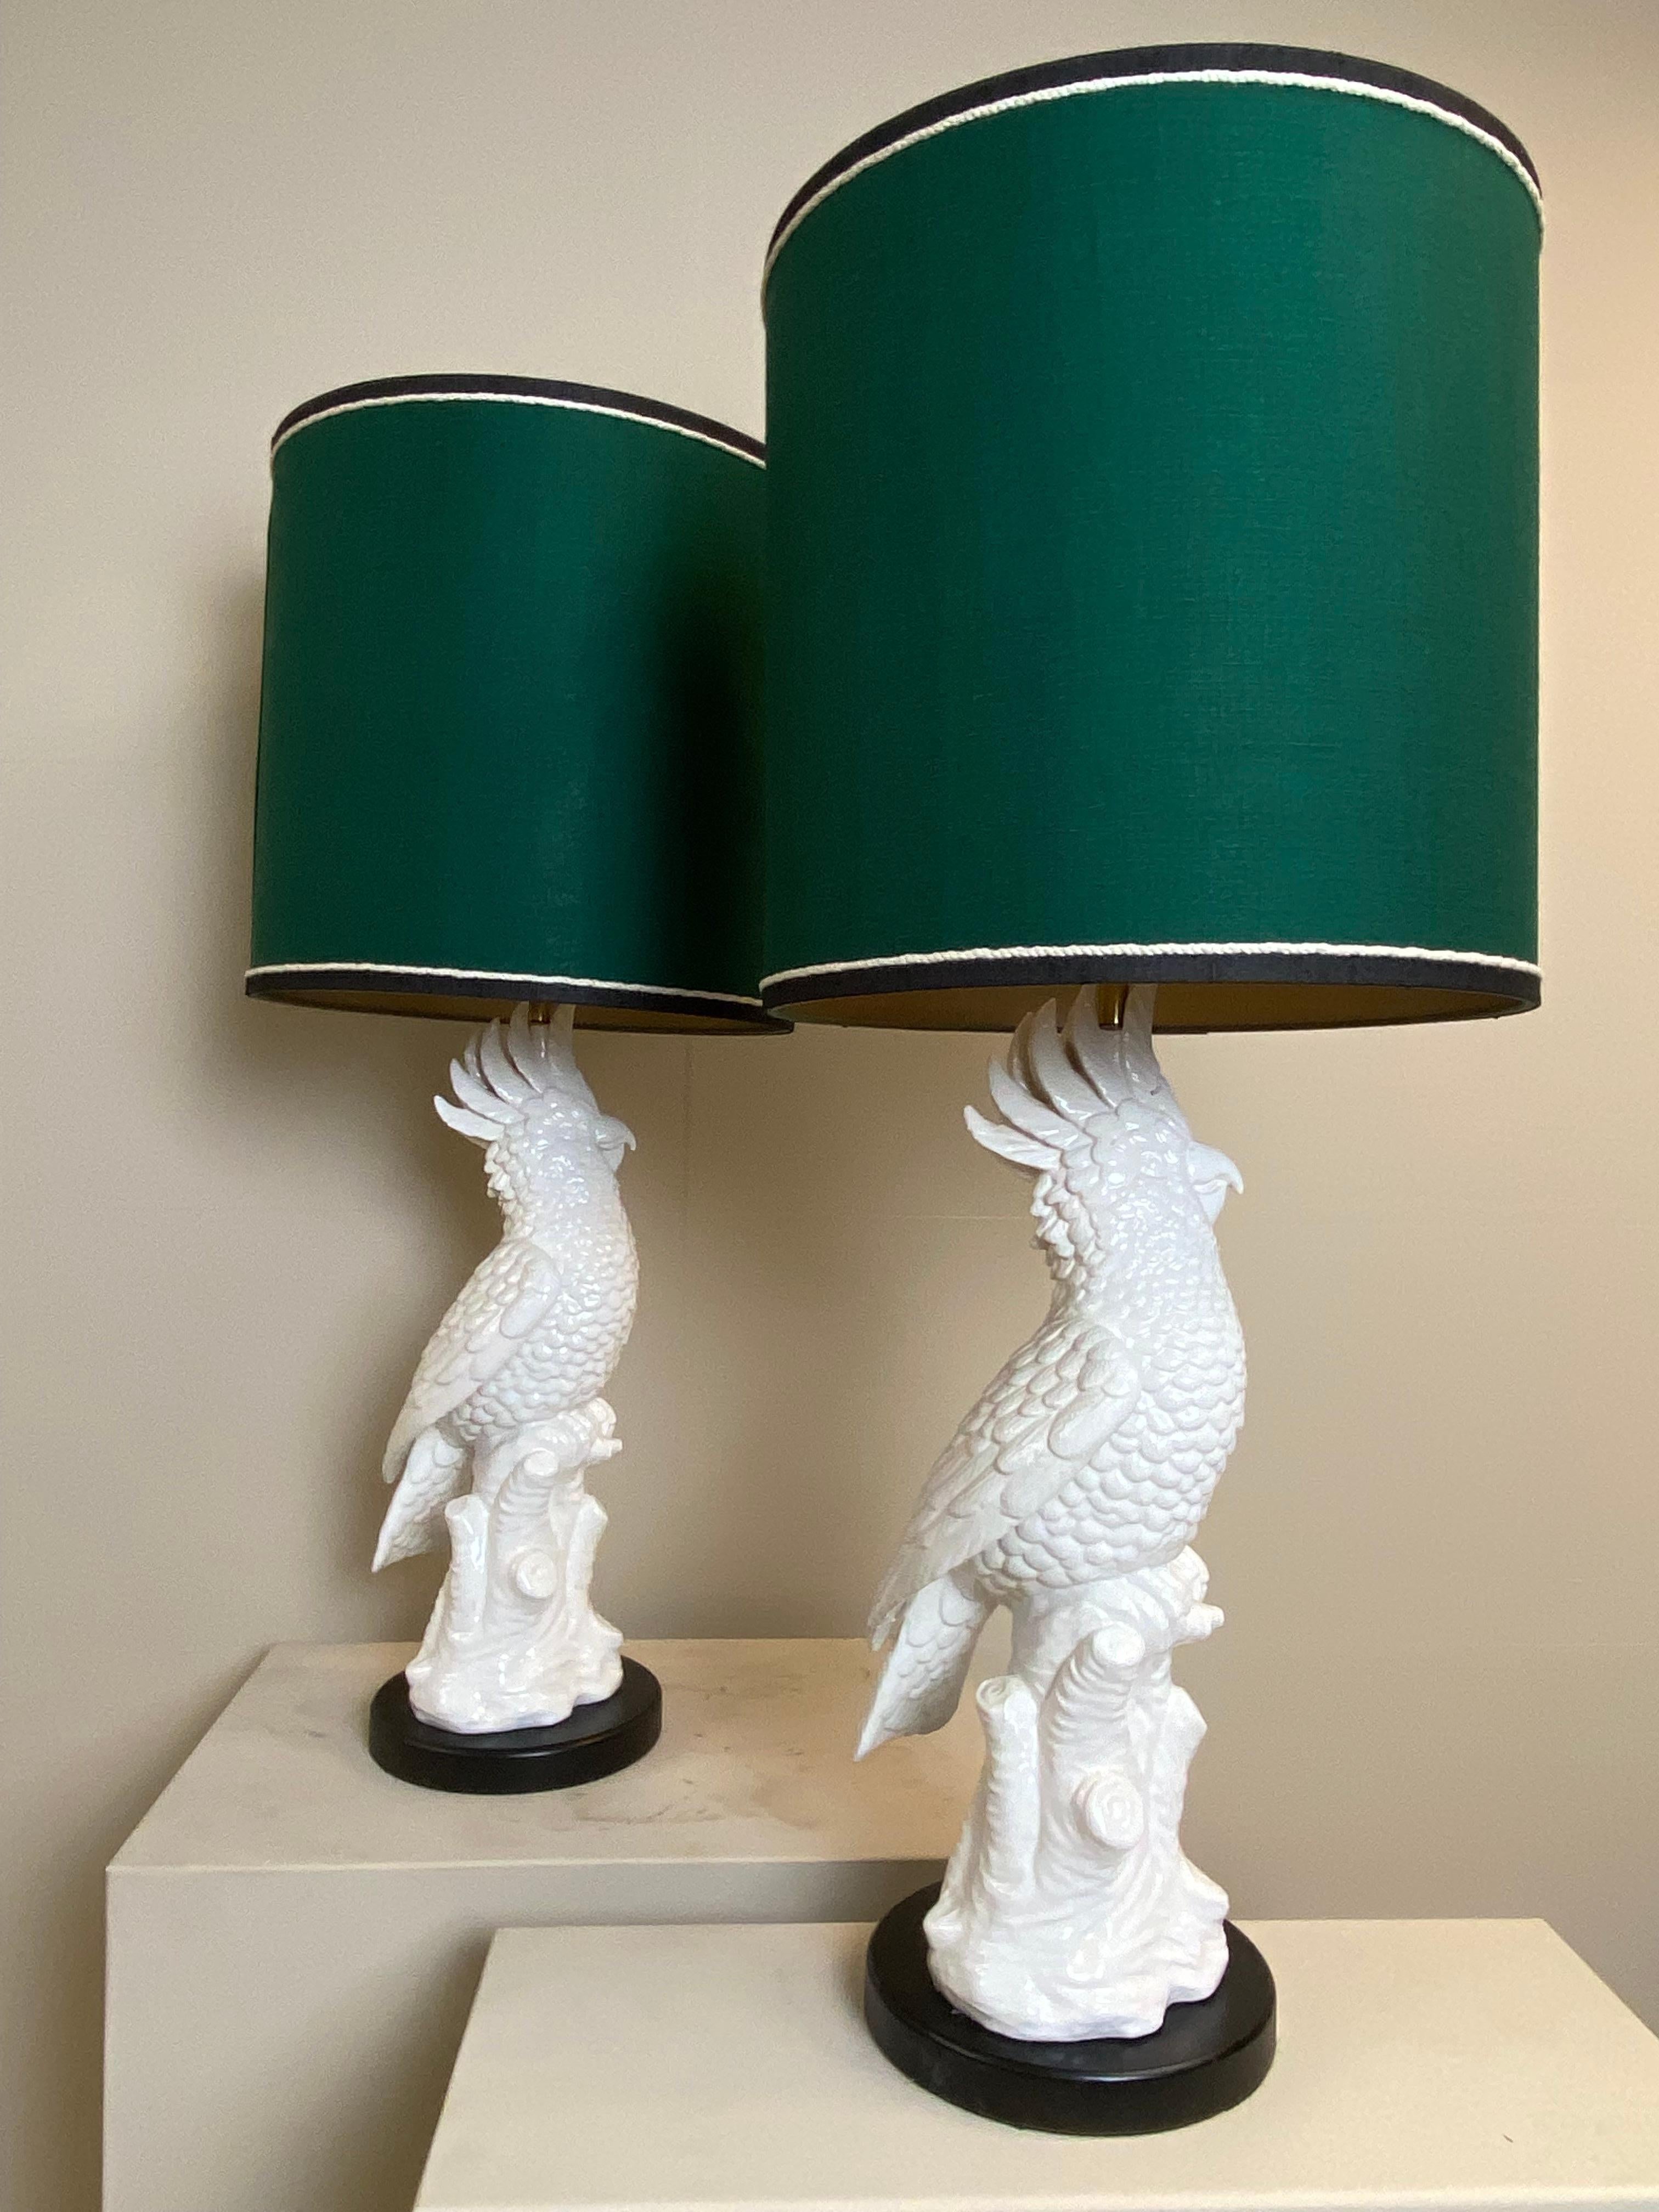 Very exceptional pair of table lamps with new shades.